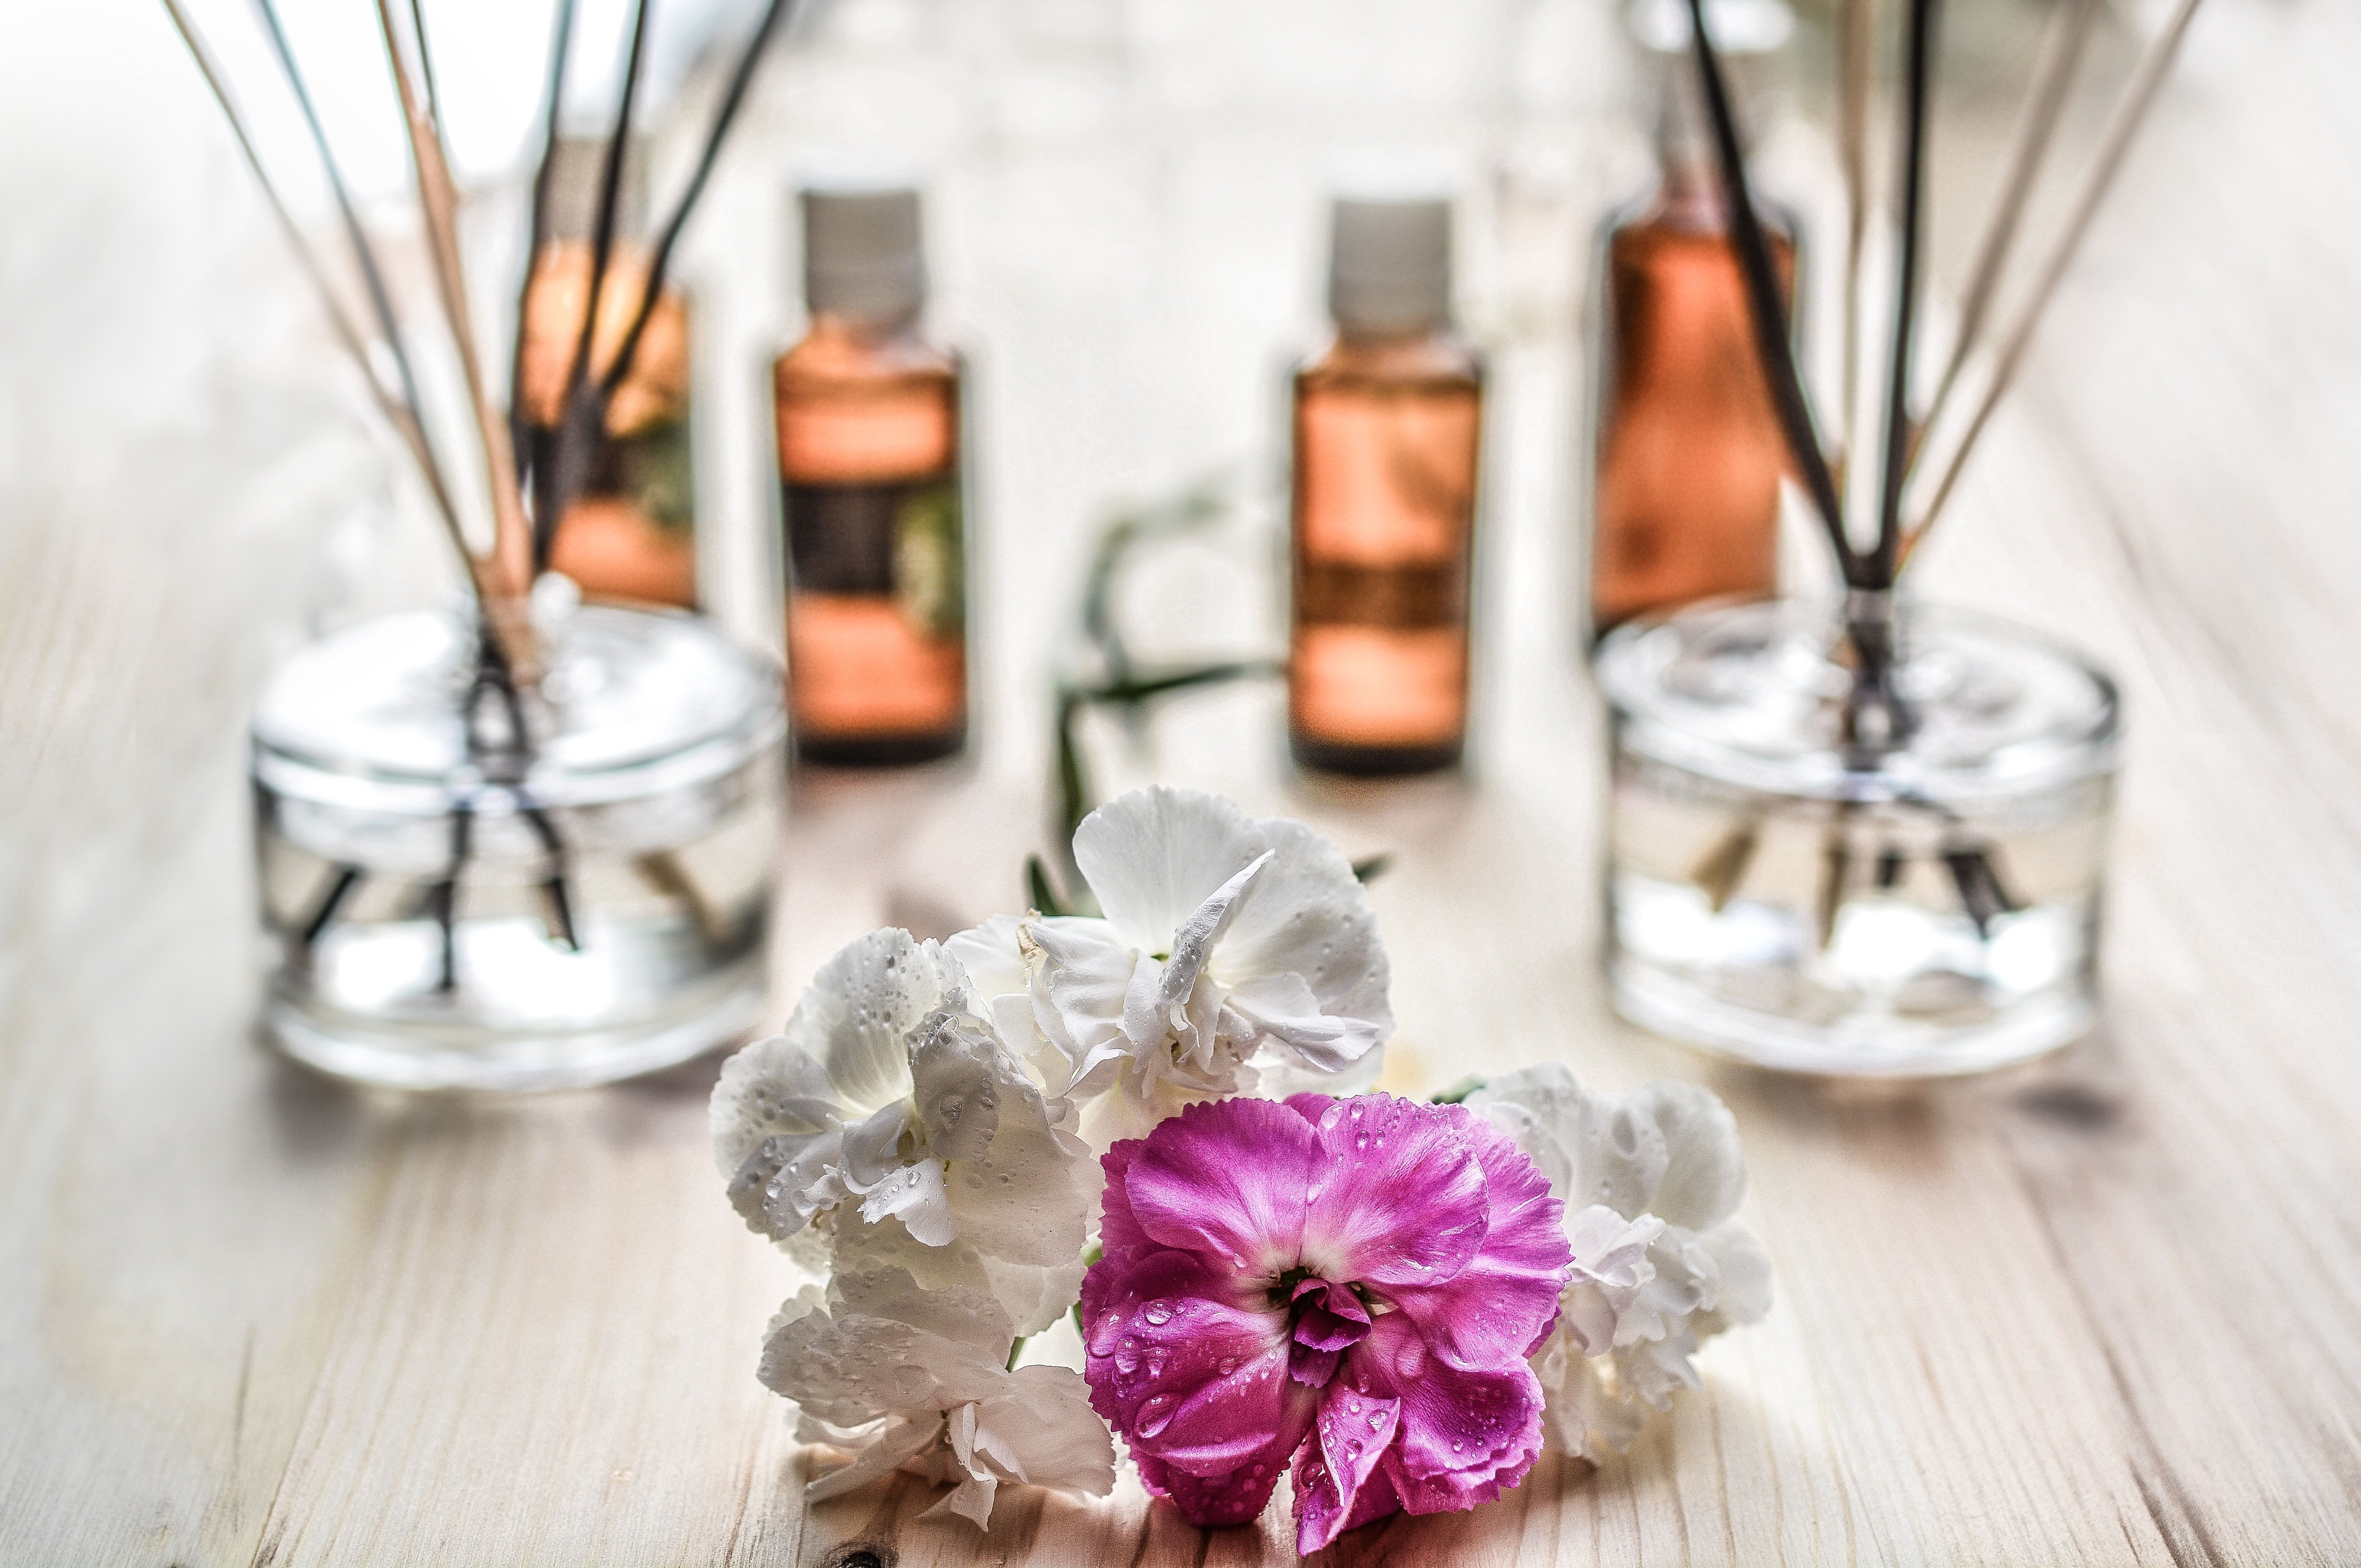 How to Dilute Essential Oils for DIY Natural Body Care - No Fuss Natural